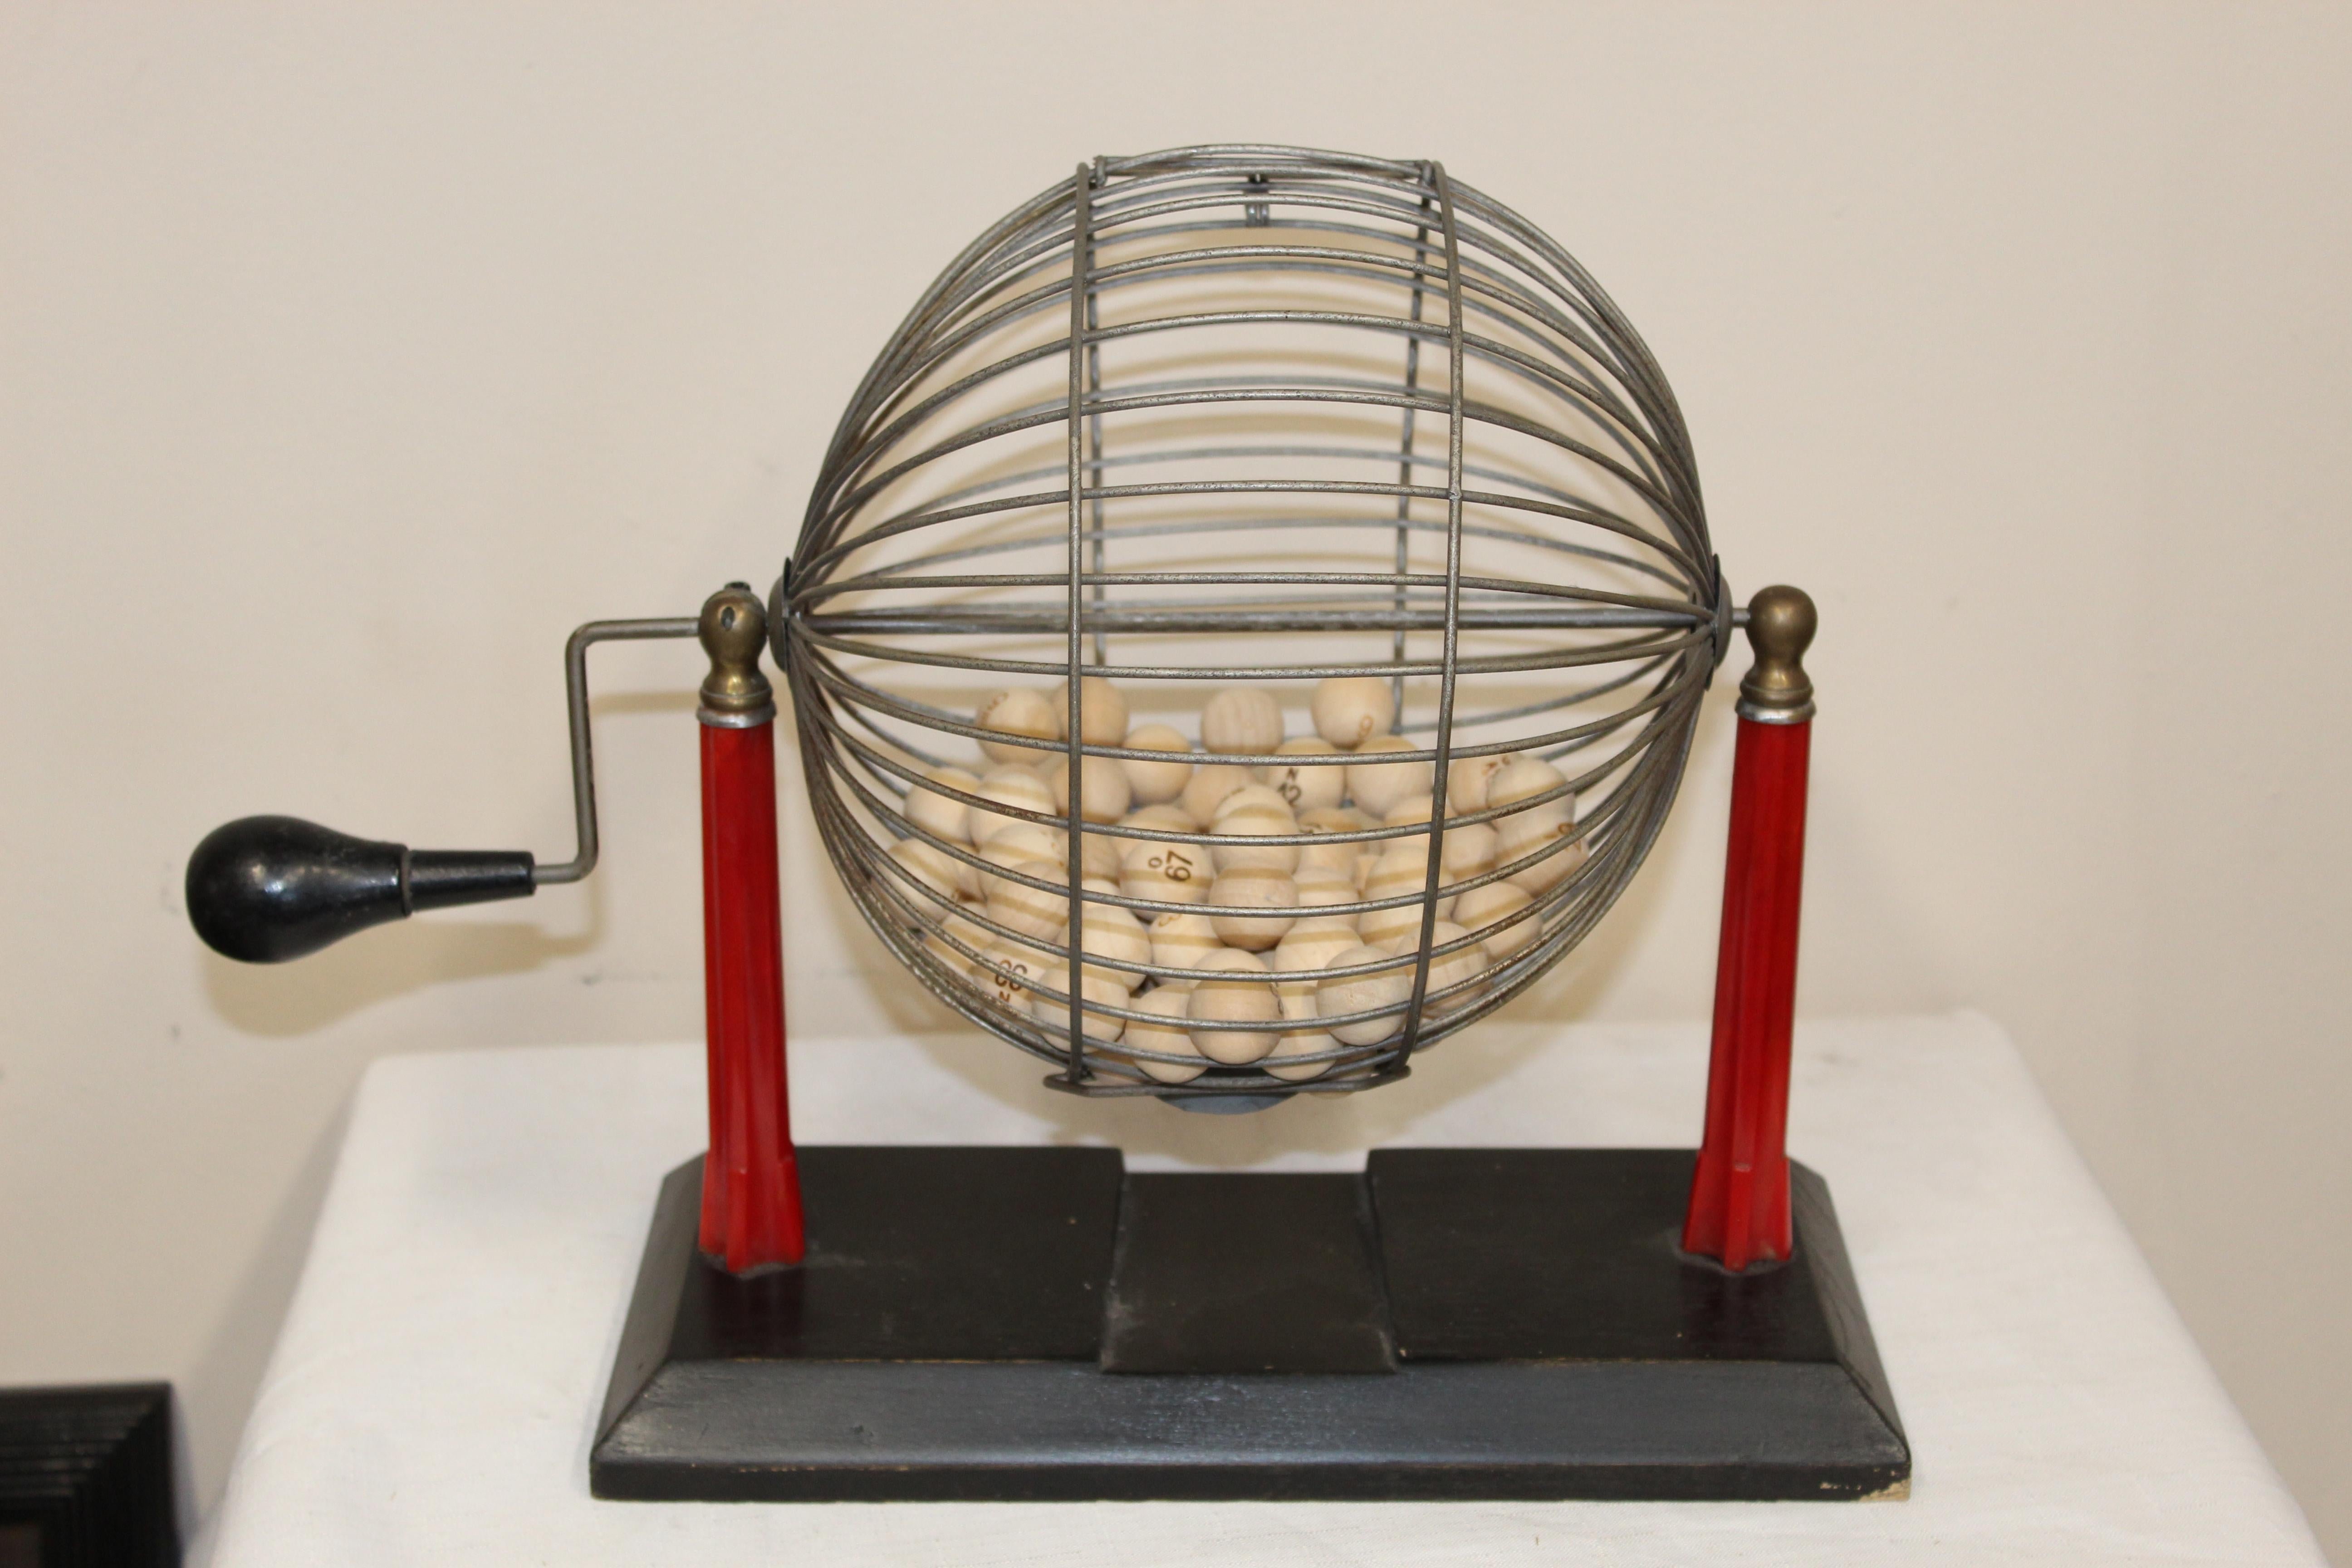 Bingo cage with bakelite red stand and an handle. Original condition, some small imperfections but over all in clean condition. Wood balls are included and numbered.